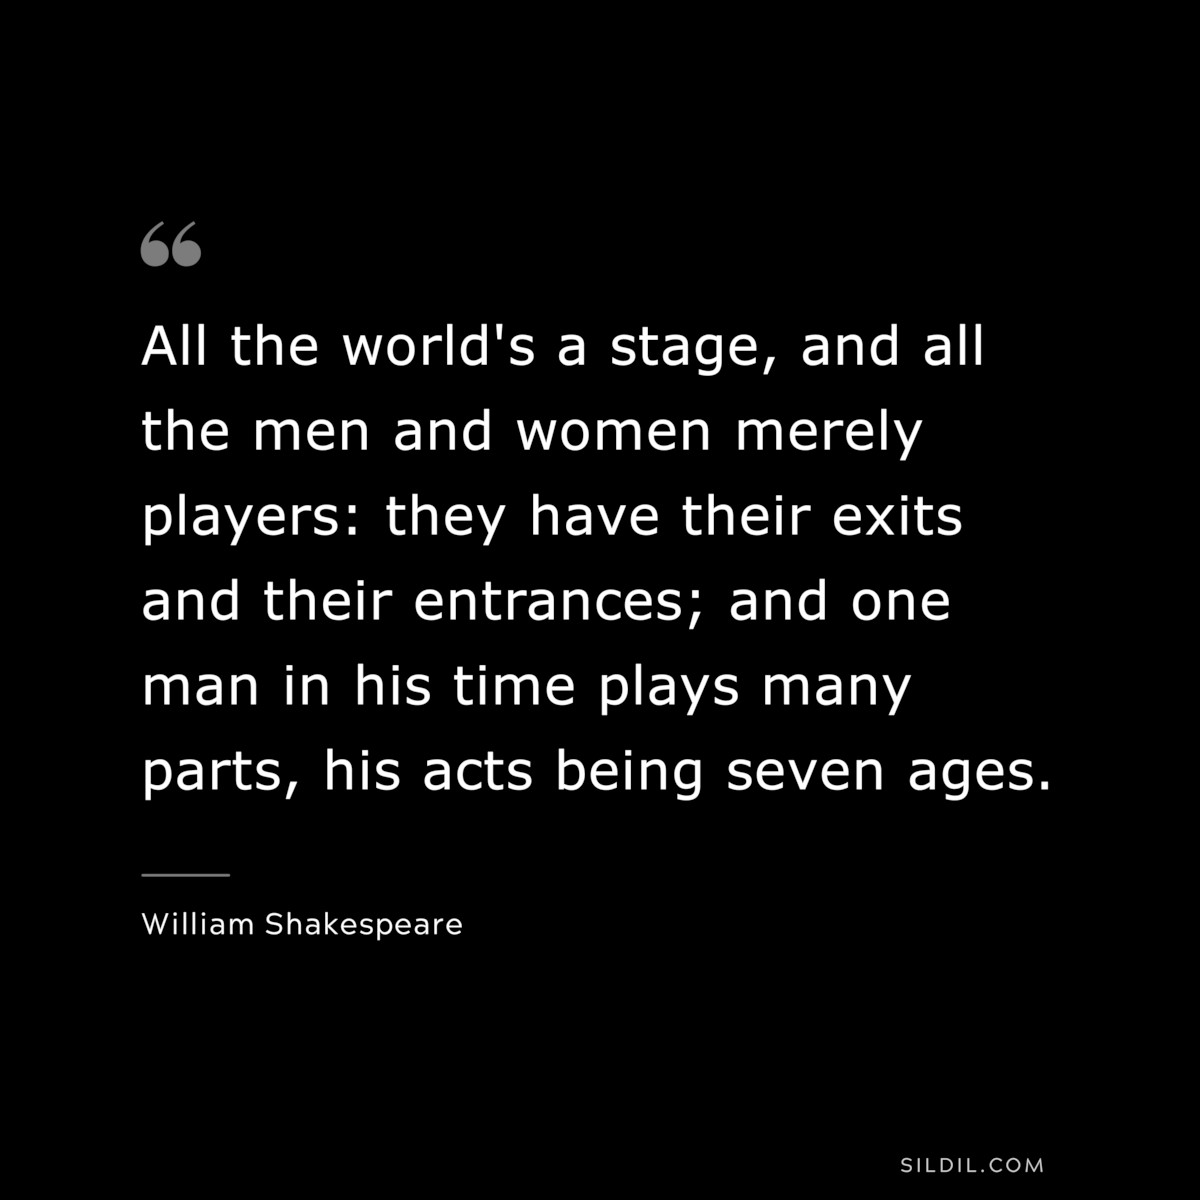 All the world's a stage, and all the men and women merely players: they have their exits and their entrances; and one man in his time plays many parts, his acts being seven ages. ― William Shakespeare